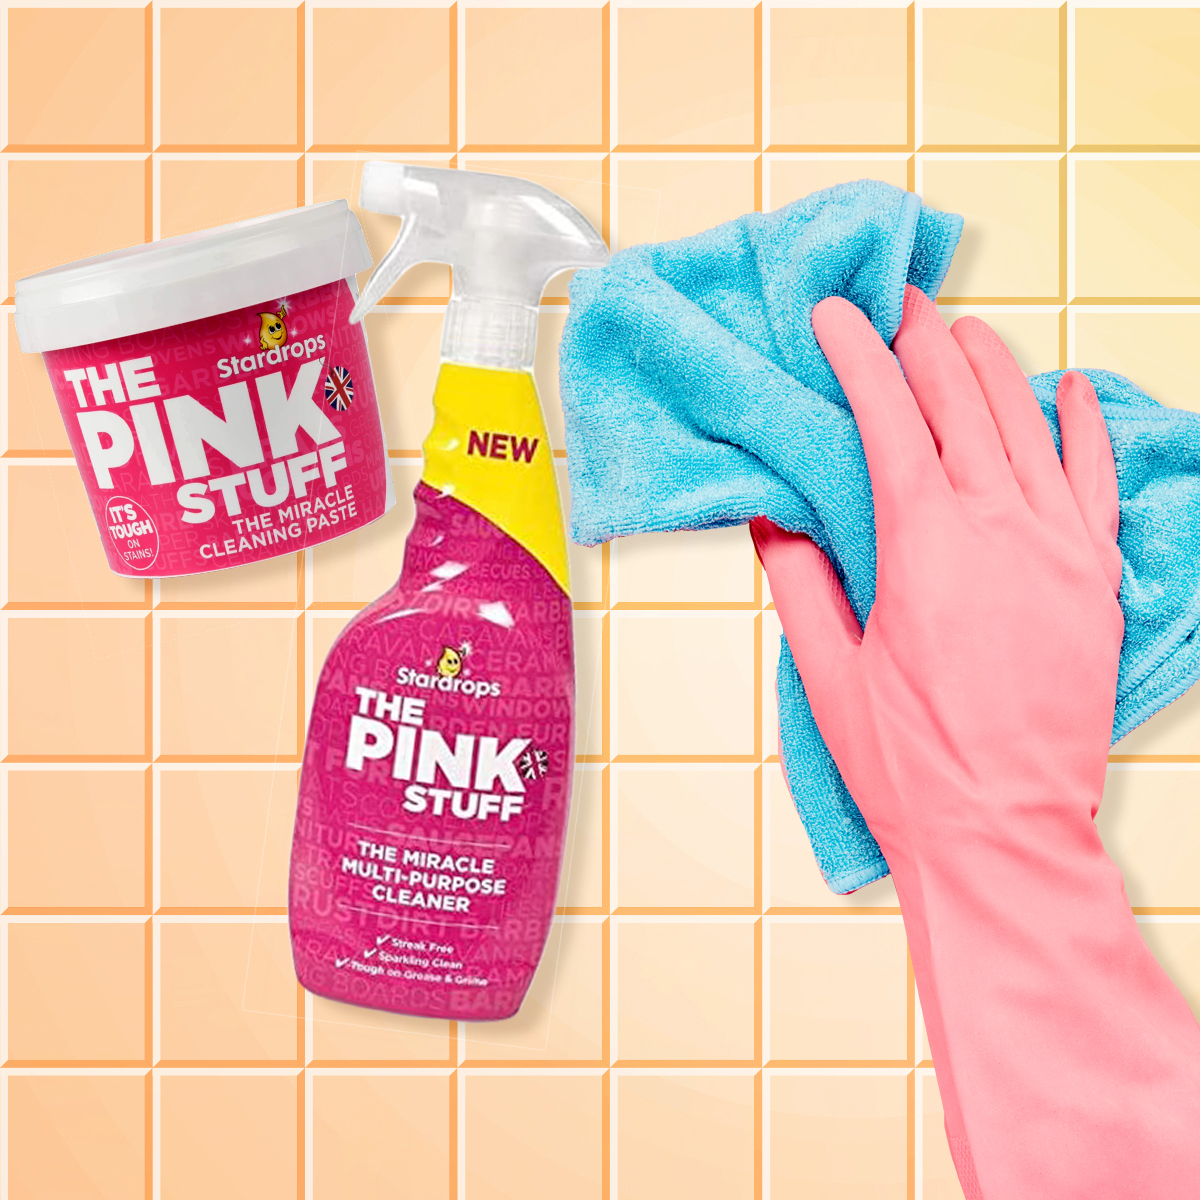 Stardrops - The Pink Stuff - The Miracle Cleaning Paste and Multi